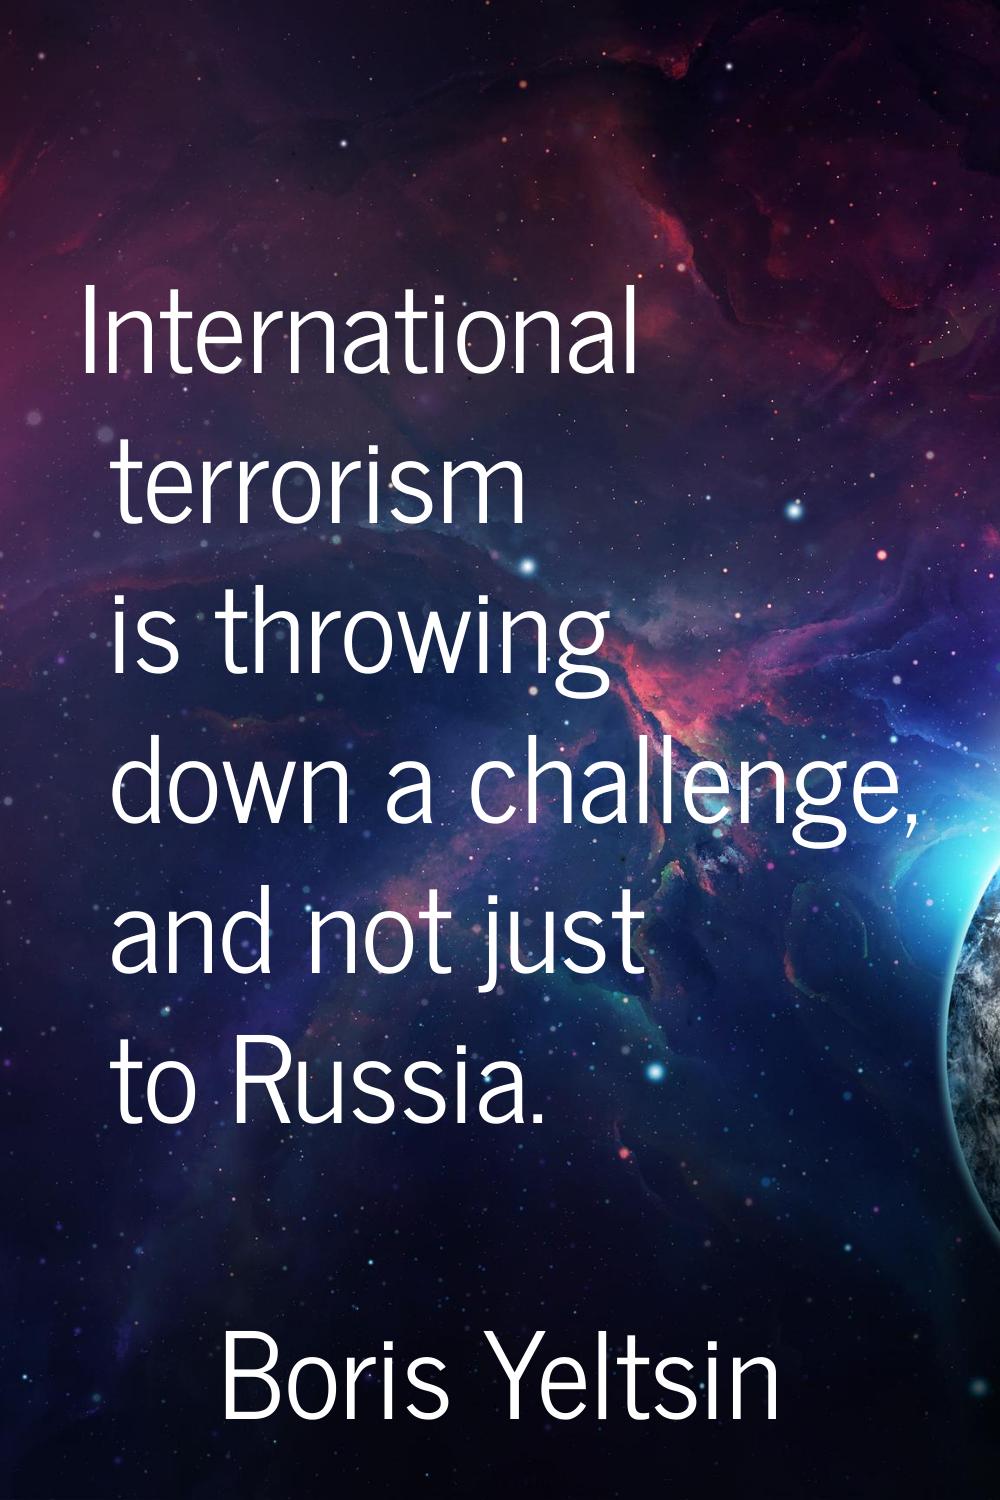 International terrorism is throwing down a challenge, and not just to Russia.